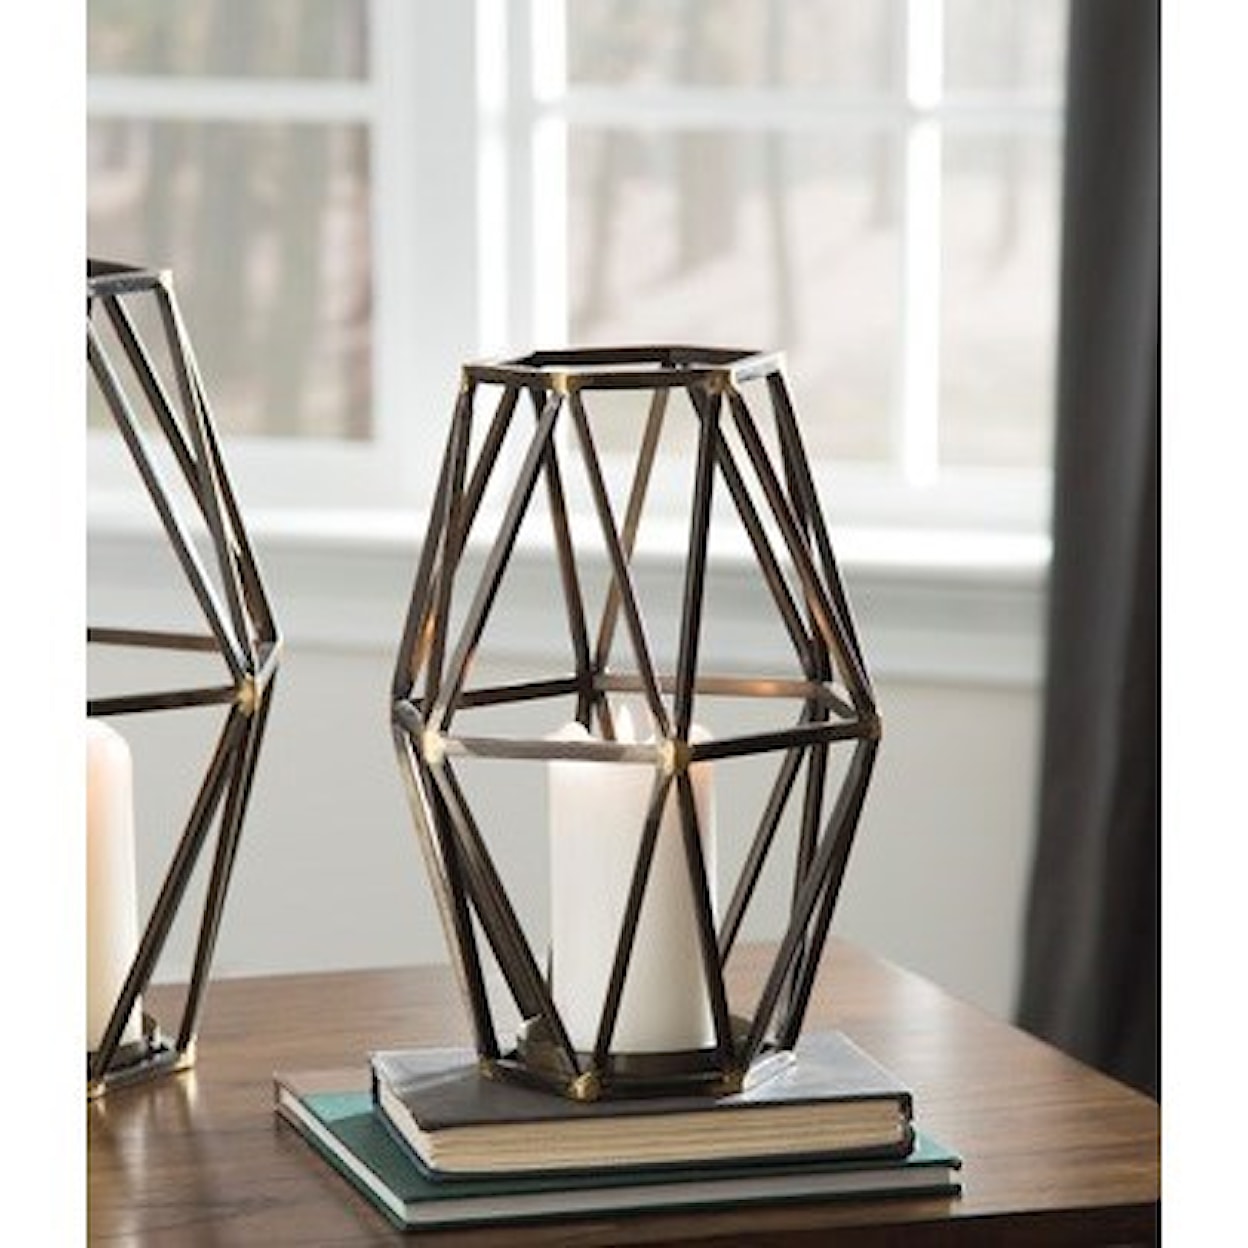 Signature Design by Ashley Accents Devo Small Candle Holder